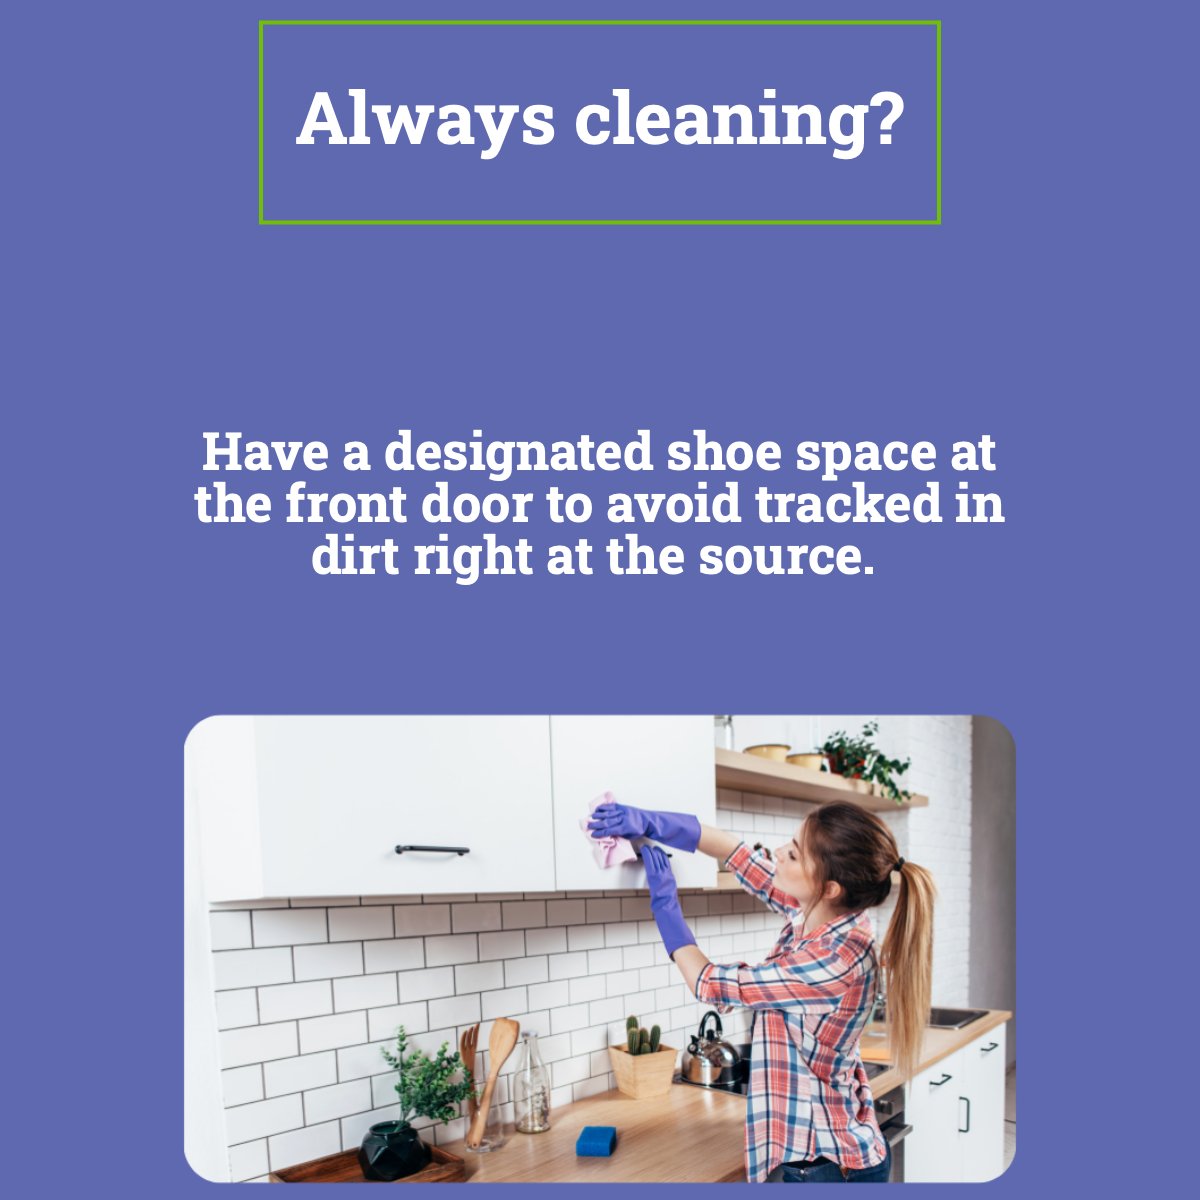 If you are tired of cleaning all the time, try this tip! 💡

#cleaningtips #cleanhouse #cleaninghacks #cleanhome
 #cherylcitro